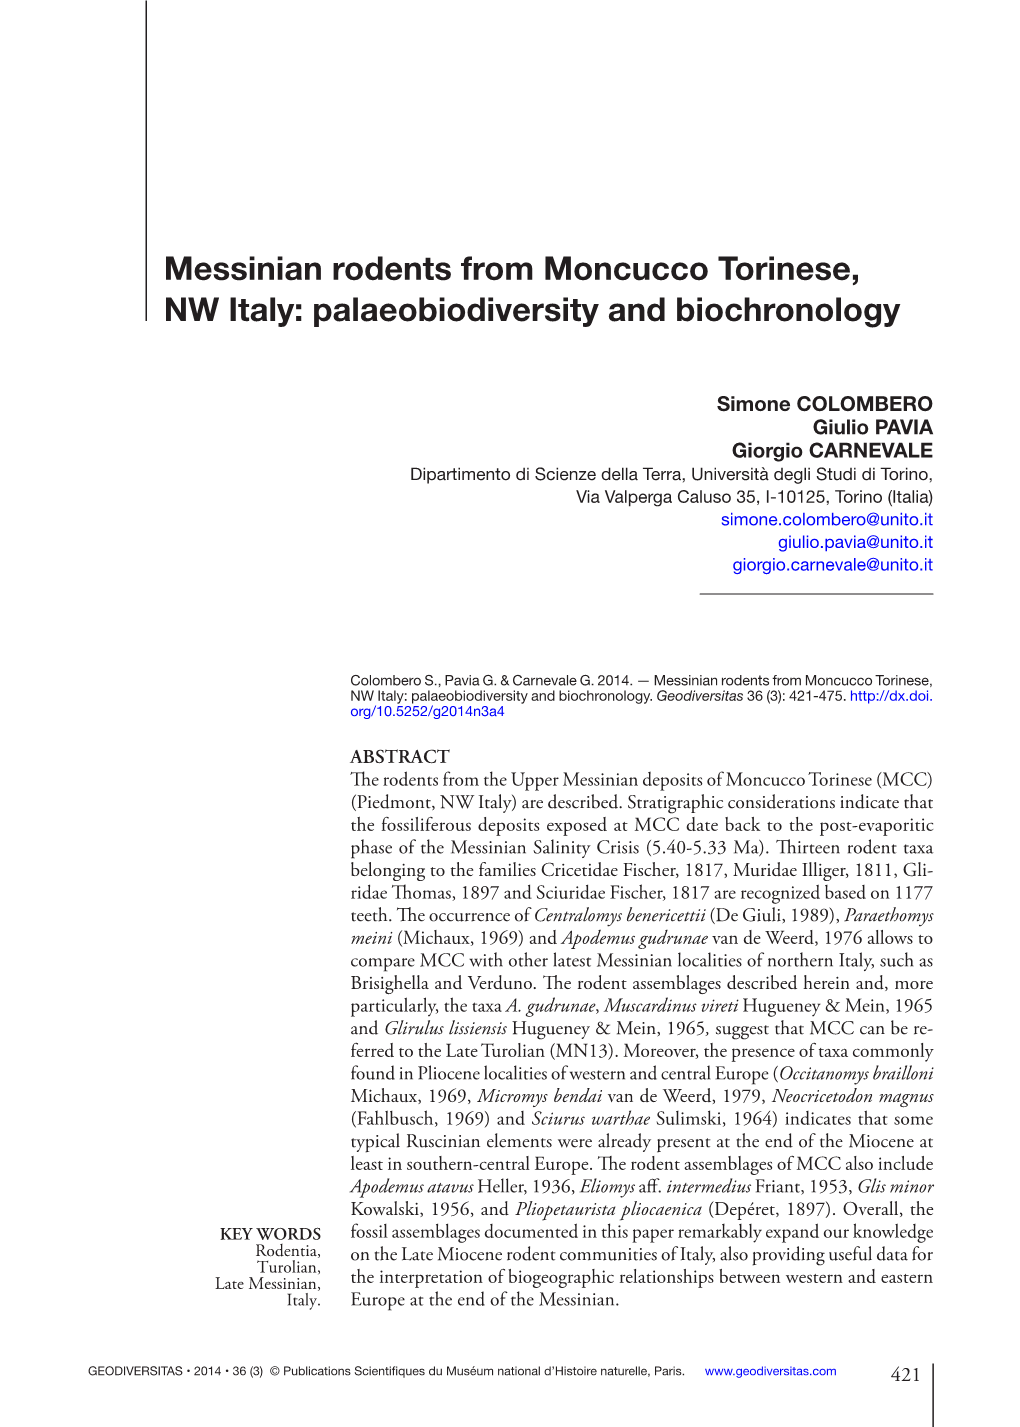 Messinian Rodents from Moncucco Torinese, NW Italy: Palaeobiodiversity and Biochronology